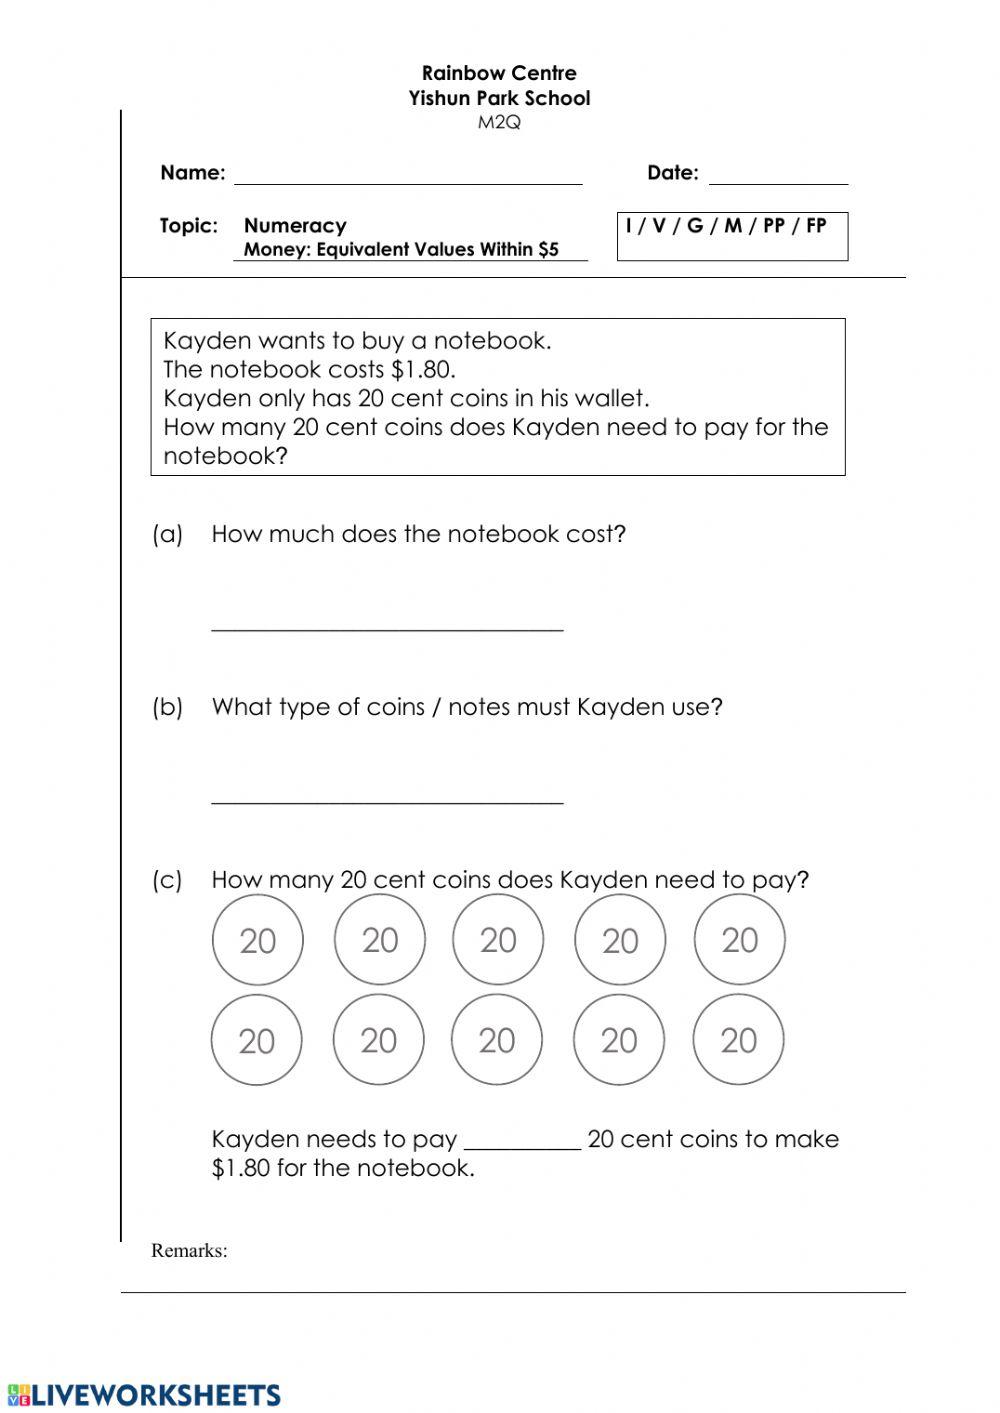 Money Problem Sums Worksheet - Equivalent Values Within -5 H, Z 1